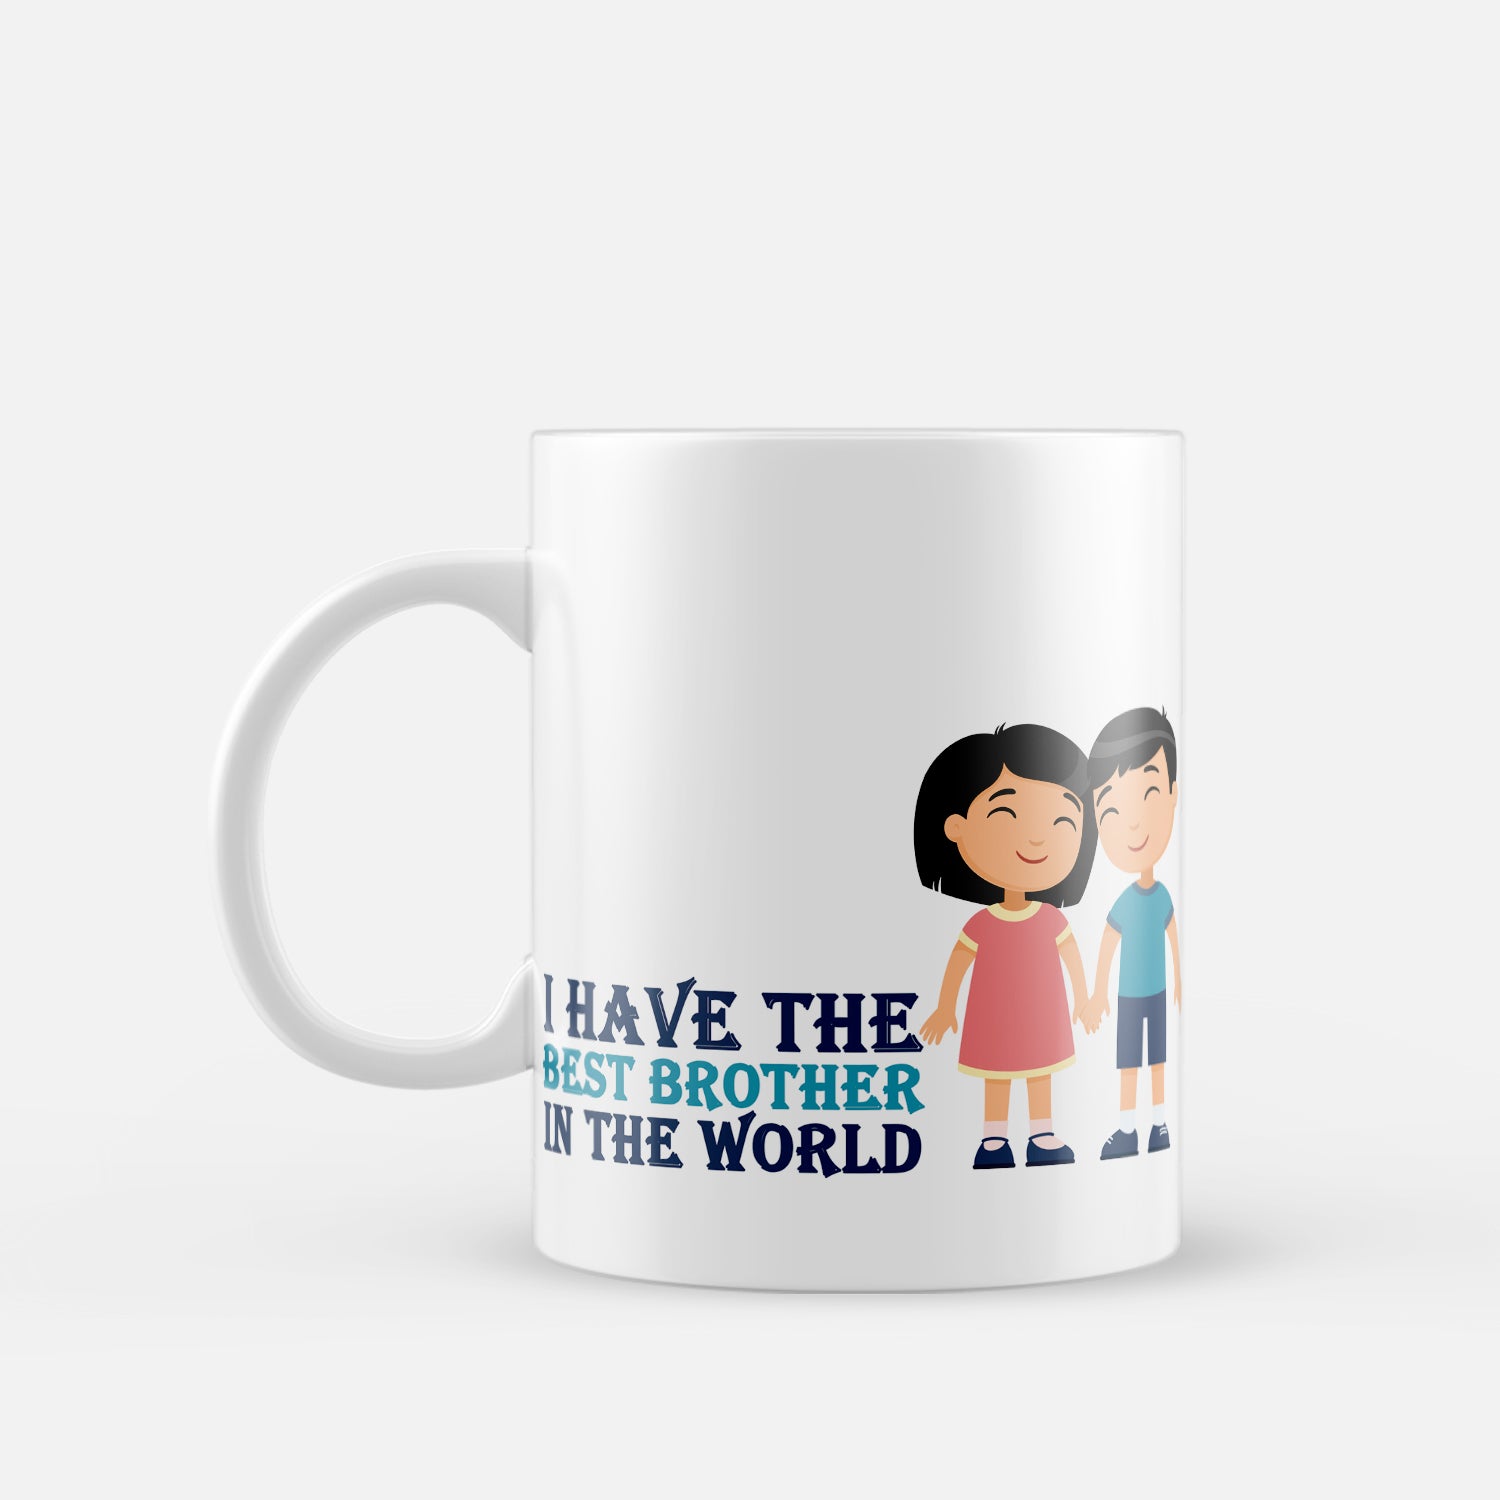 "I have the Best Brother In The World" Brother Ceramic Coffee/Tea Mug 2